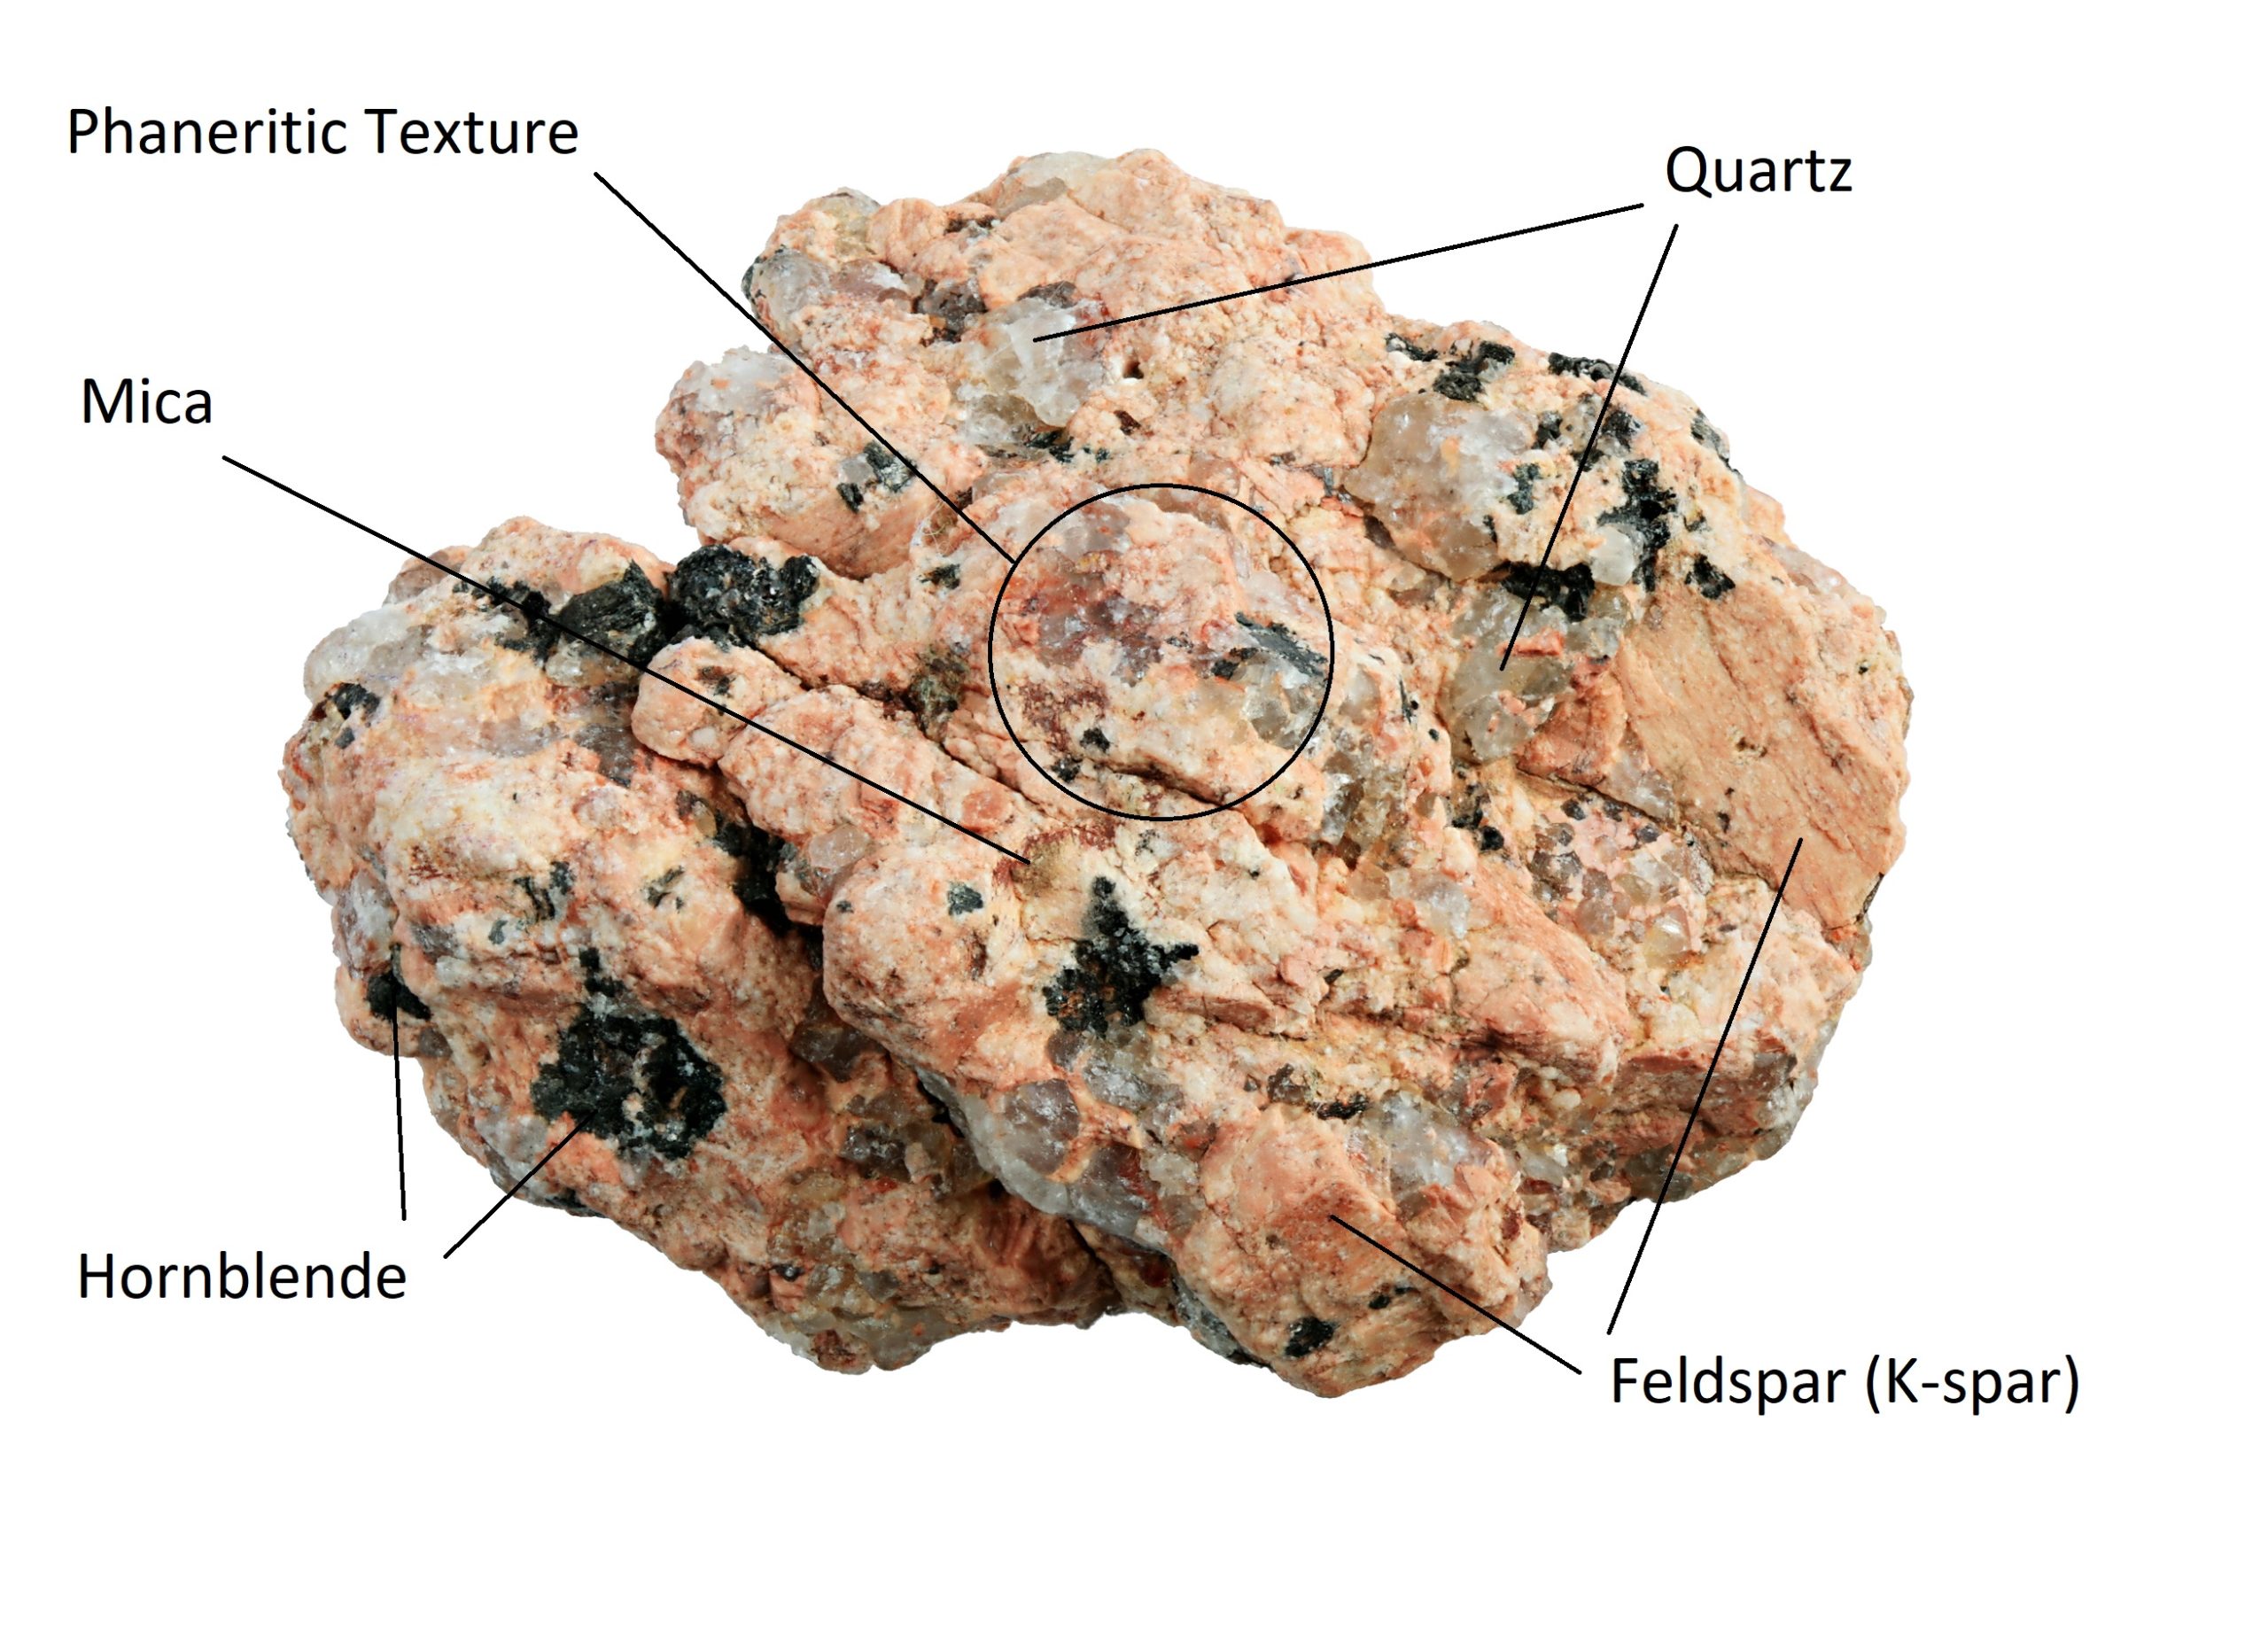 Rough granite specimen with a phaneritic texture and clearly visible crystals of quartz, feldspar, hornblende, and mica.